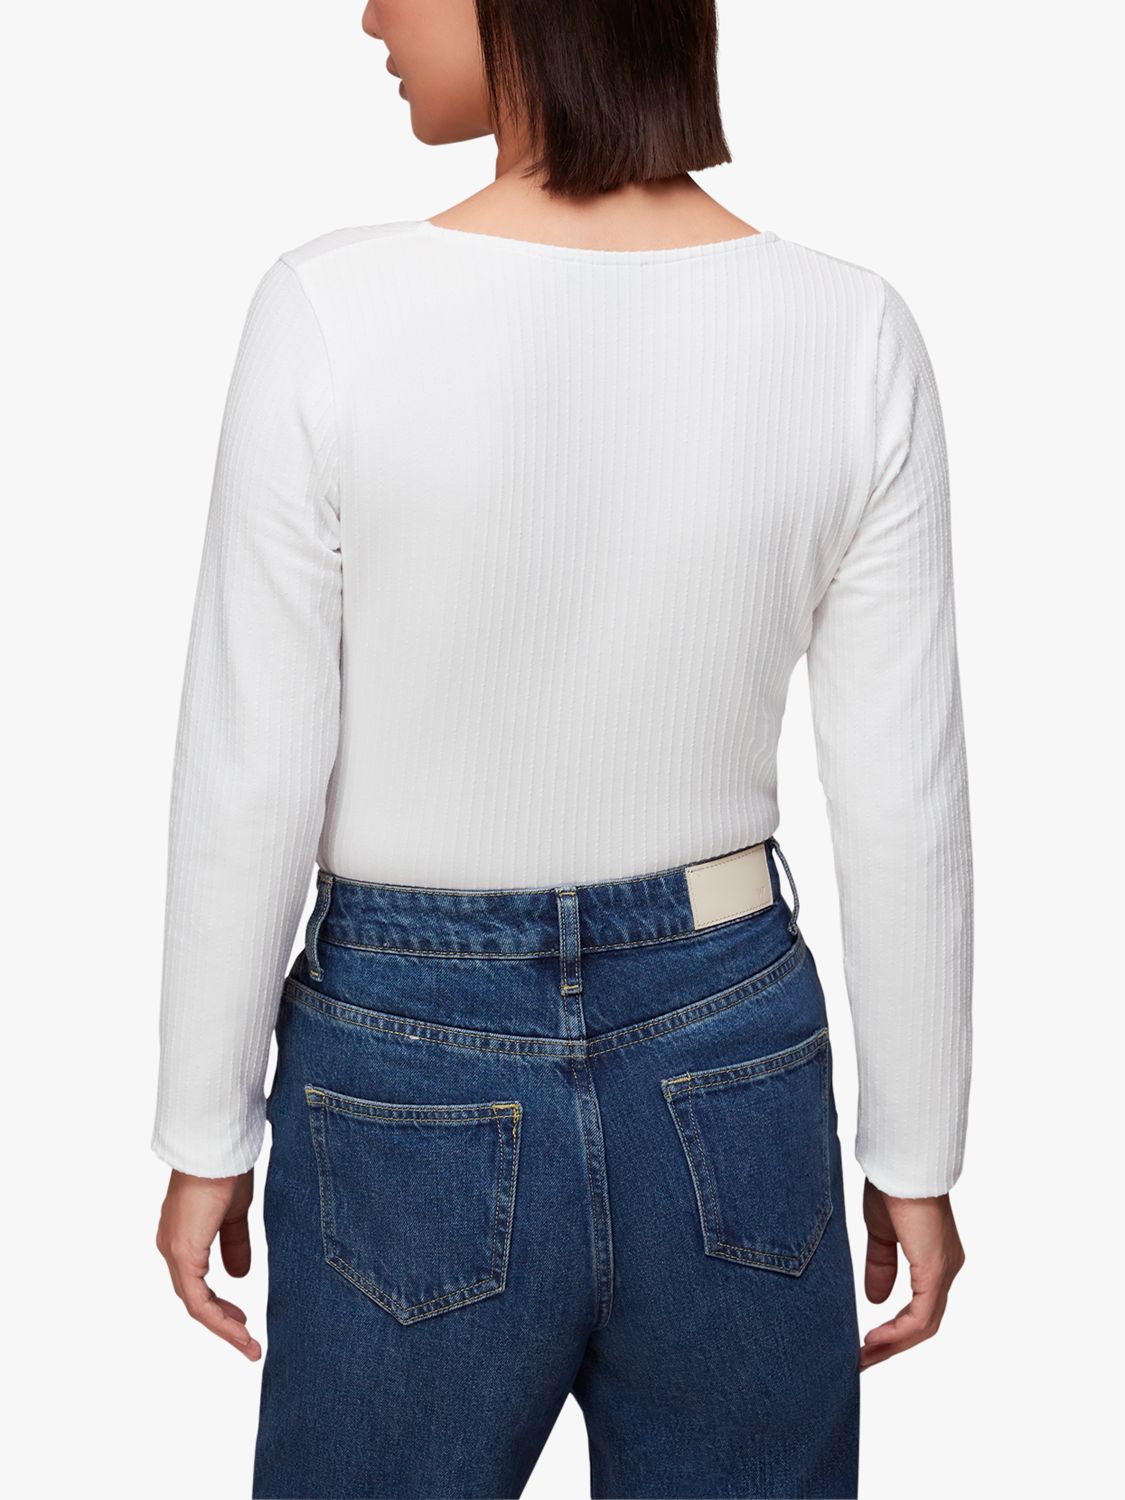 Petite White Square Neck Ribbed Long Sleeve Crop Top